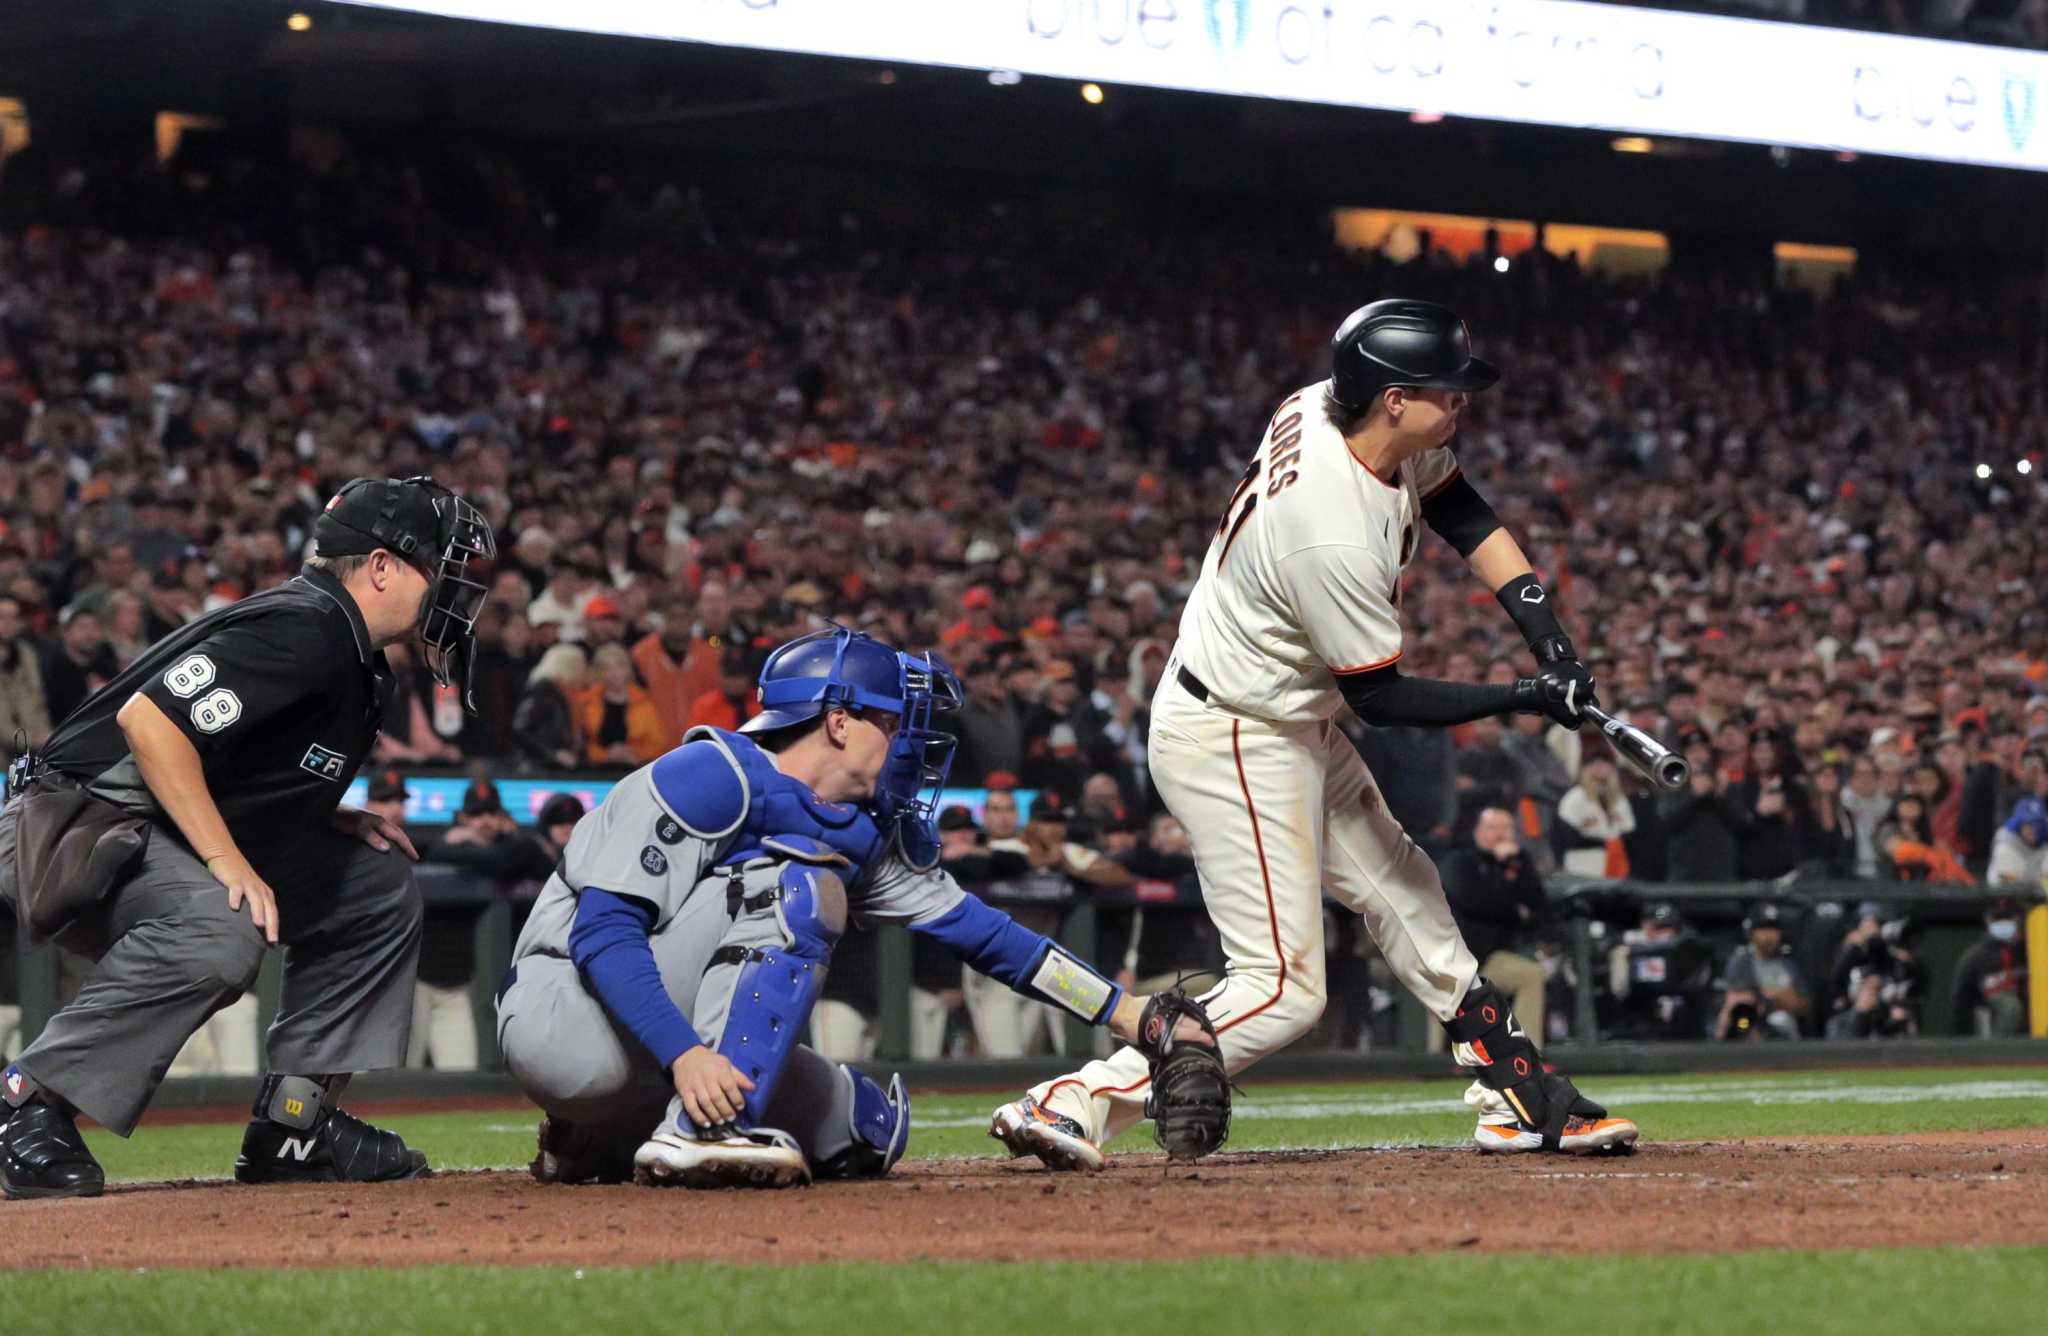 SF Giants: Webb done in by HR to start Dodgers rivalry on sour note